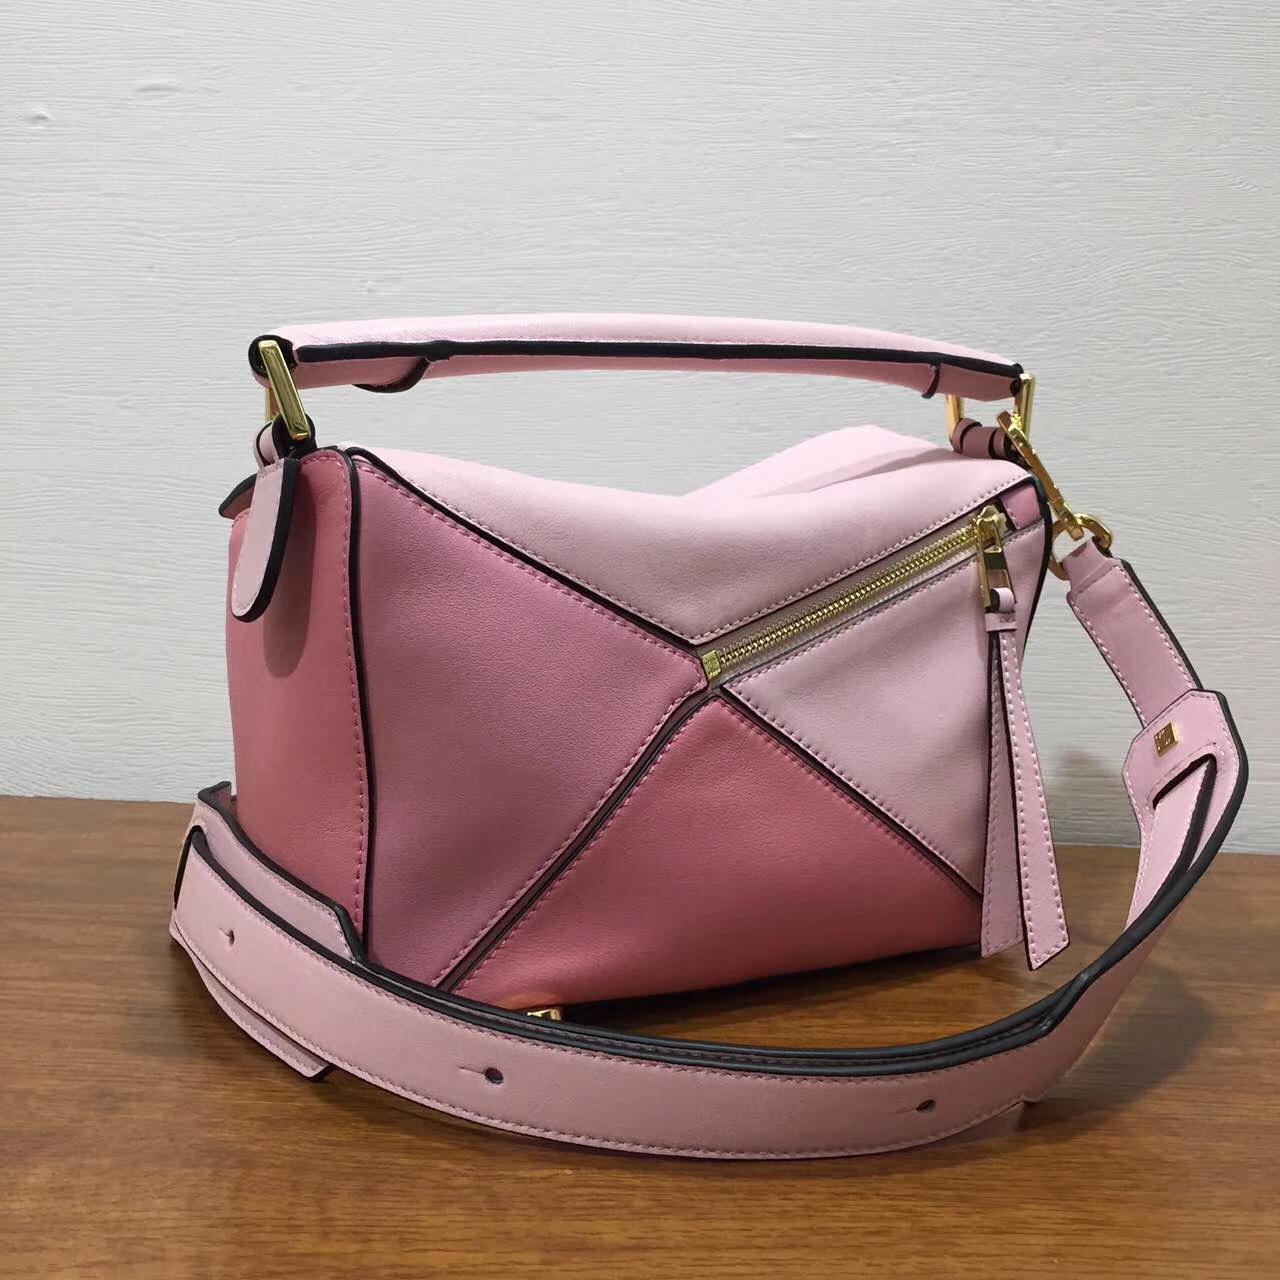 loewe羅意威 Puzzle Small Bag soft pink/candy/dark pink